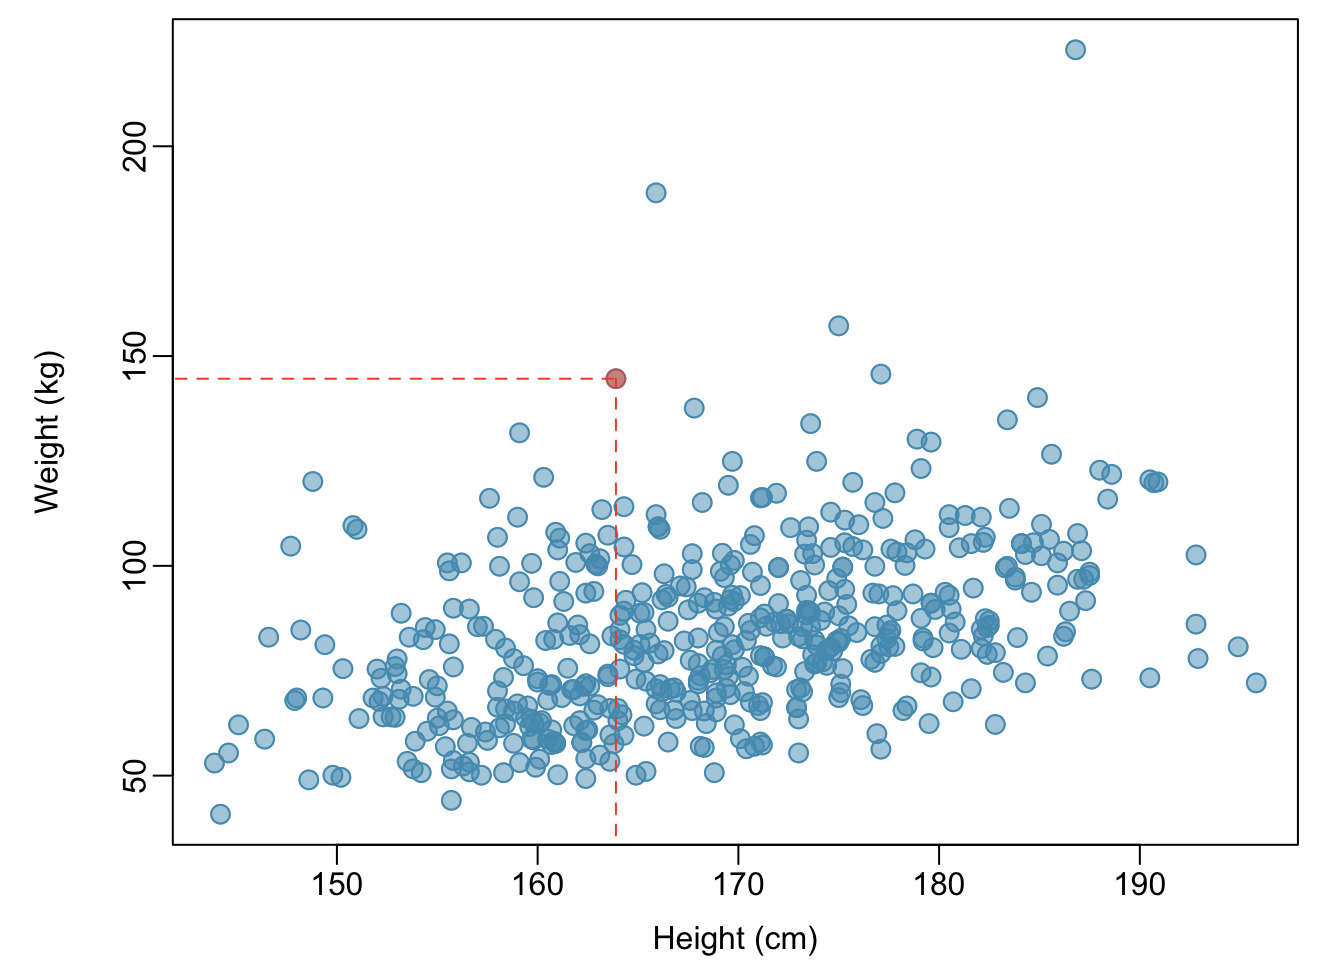 A scatterplot showing height versus weight from the 500 individuals in the sample from `NHANES`. One participant 163.9 cm tall (about 5 ft, 4 in) and weighing 144.6 kg (about 319 lb) is highlighted.